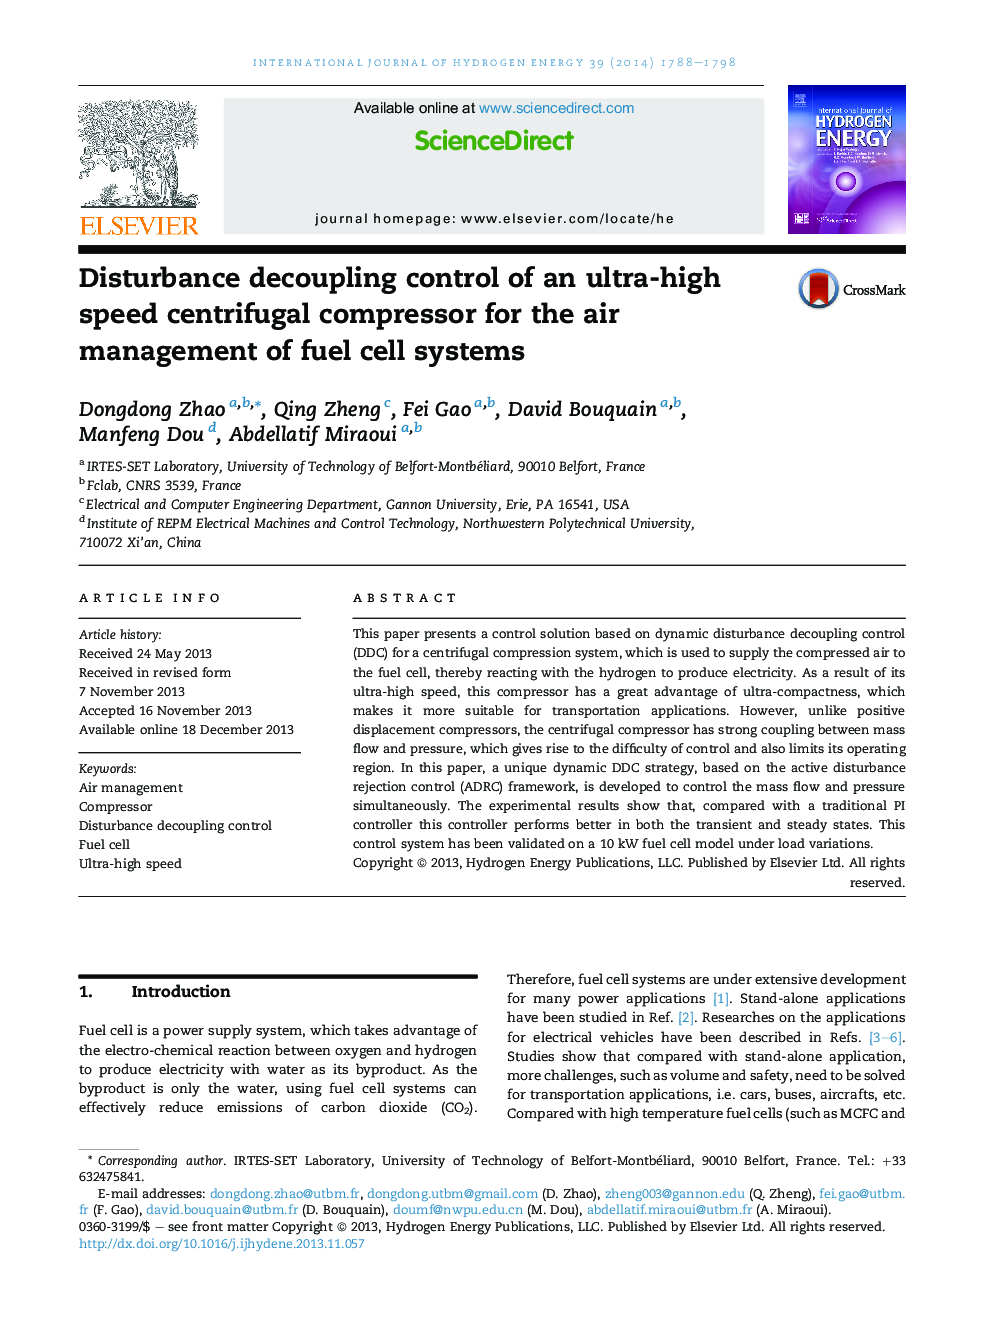 Disturbance decoupling control of an ultra-high speed centrifugal compressor for the air management of fuel cell systems